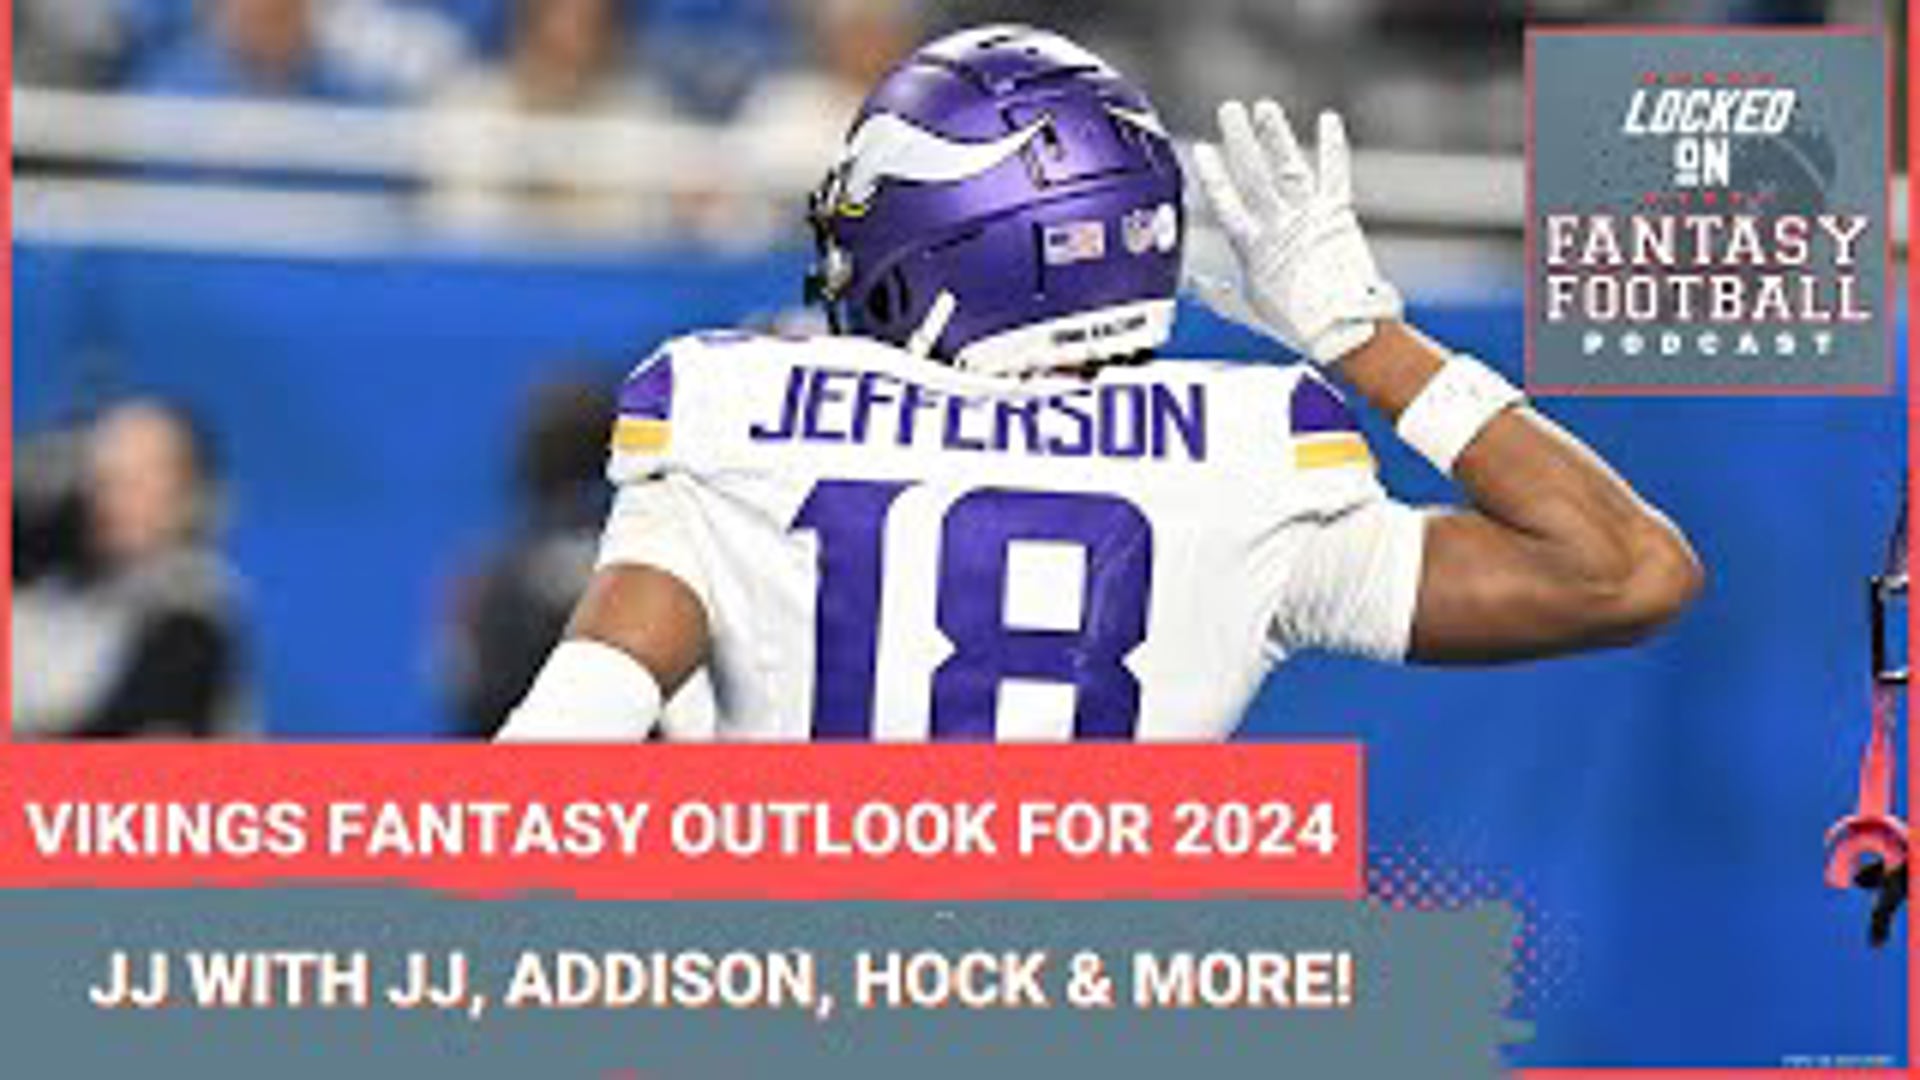 Sporting News.com's Vinnie Iyer and NFL.com's Michelle Magdziuk break down the fantasy football potential of the 2024 Minnesota Vikings.